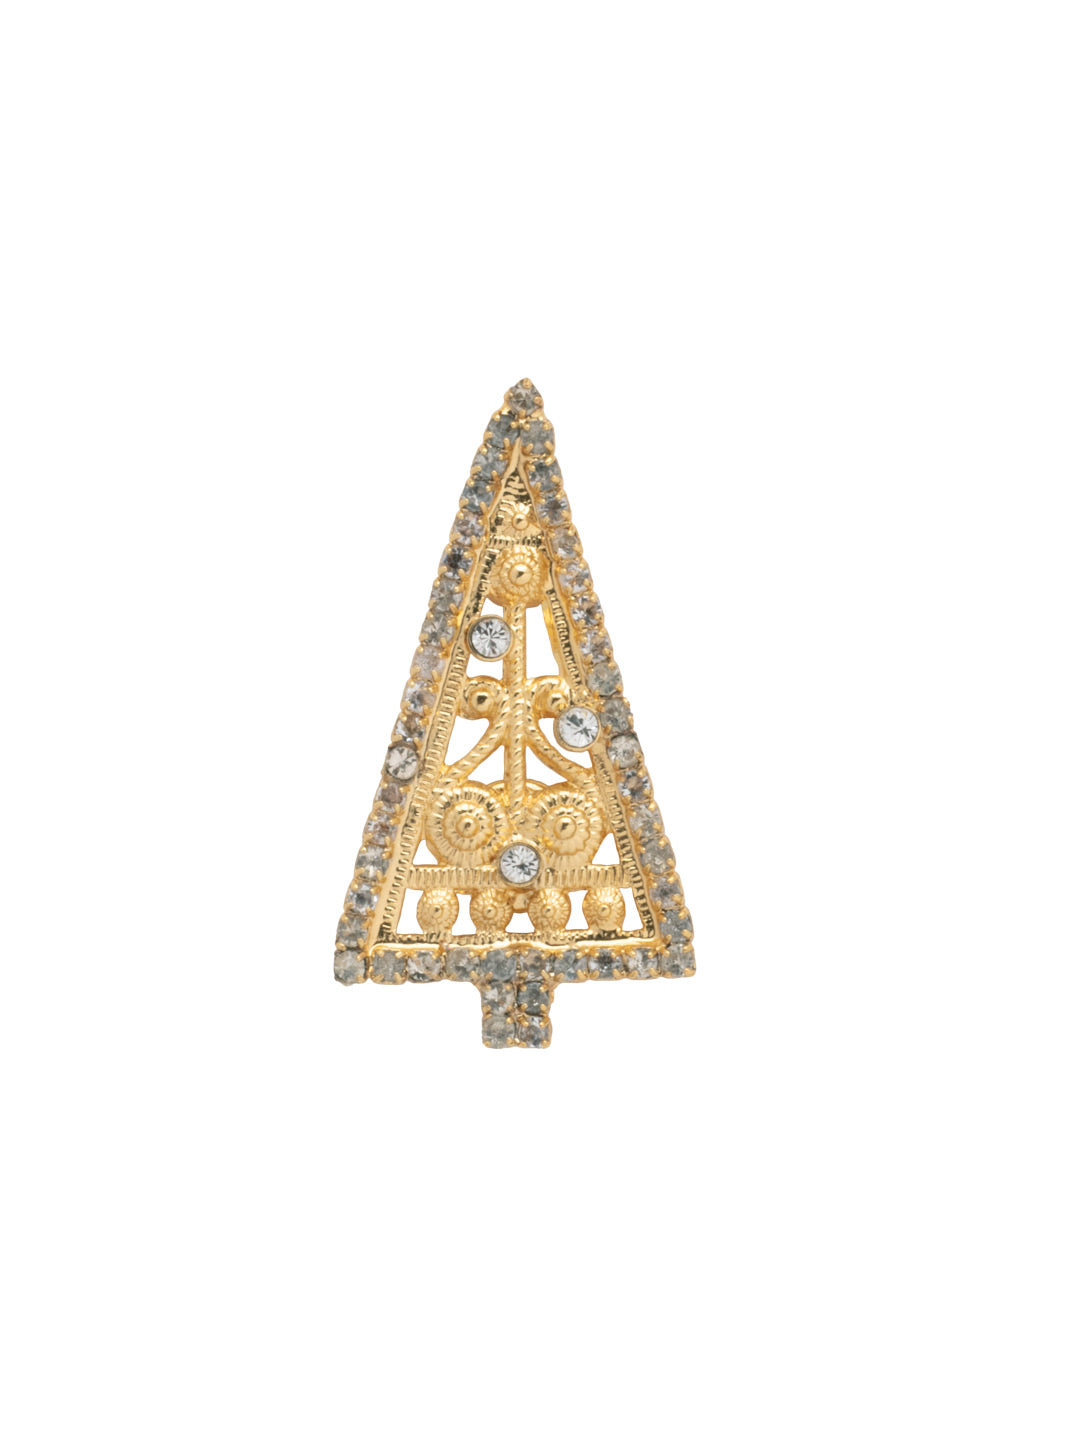 Spruce Magnetic Charm - CHM7BGCRY - <p>The Spruce Magnetic Charm will make you feel jolly when bag, blazer, dress or refrigerator. The charm is covered in mulipule colored crystals that resemble a christmas tree. From Sorrelli's Crystal collection in our Bright Gold-tone finish.</p>